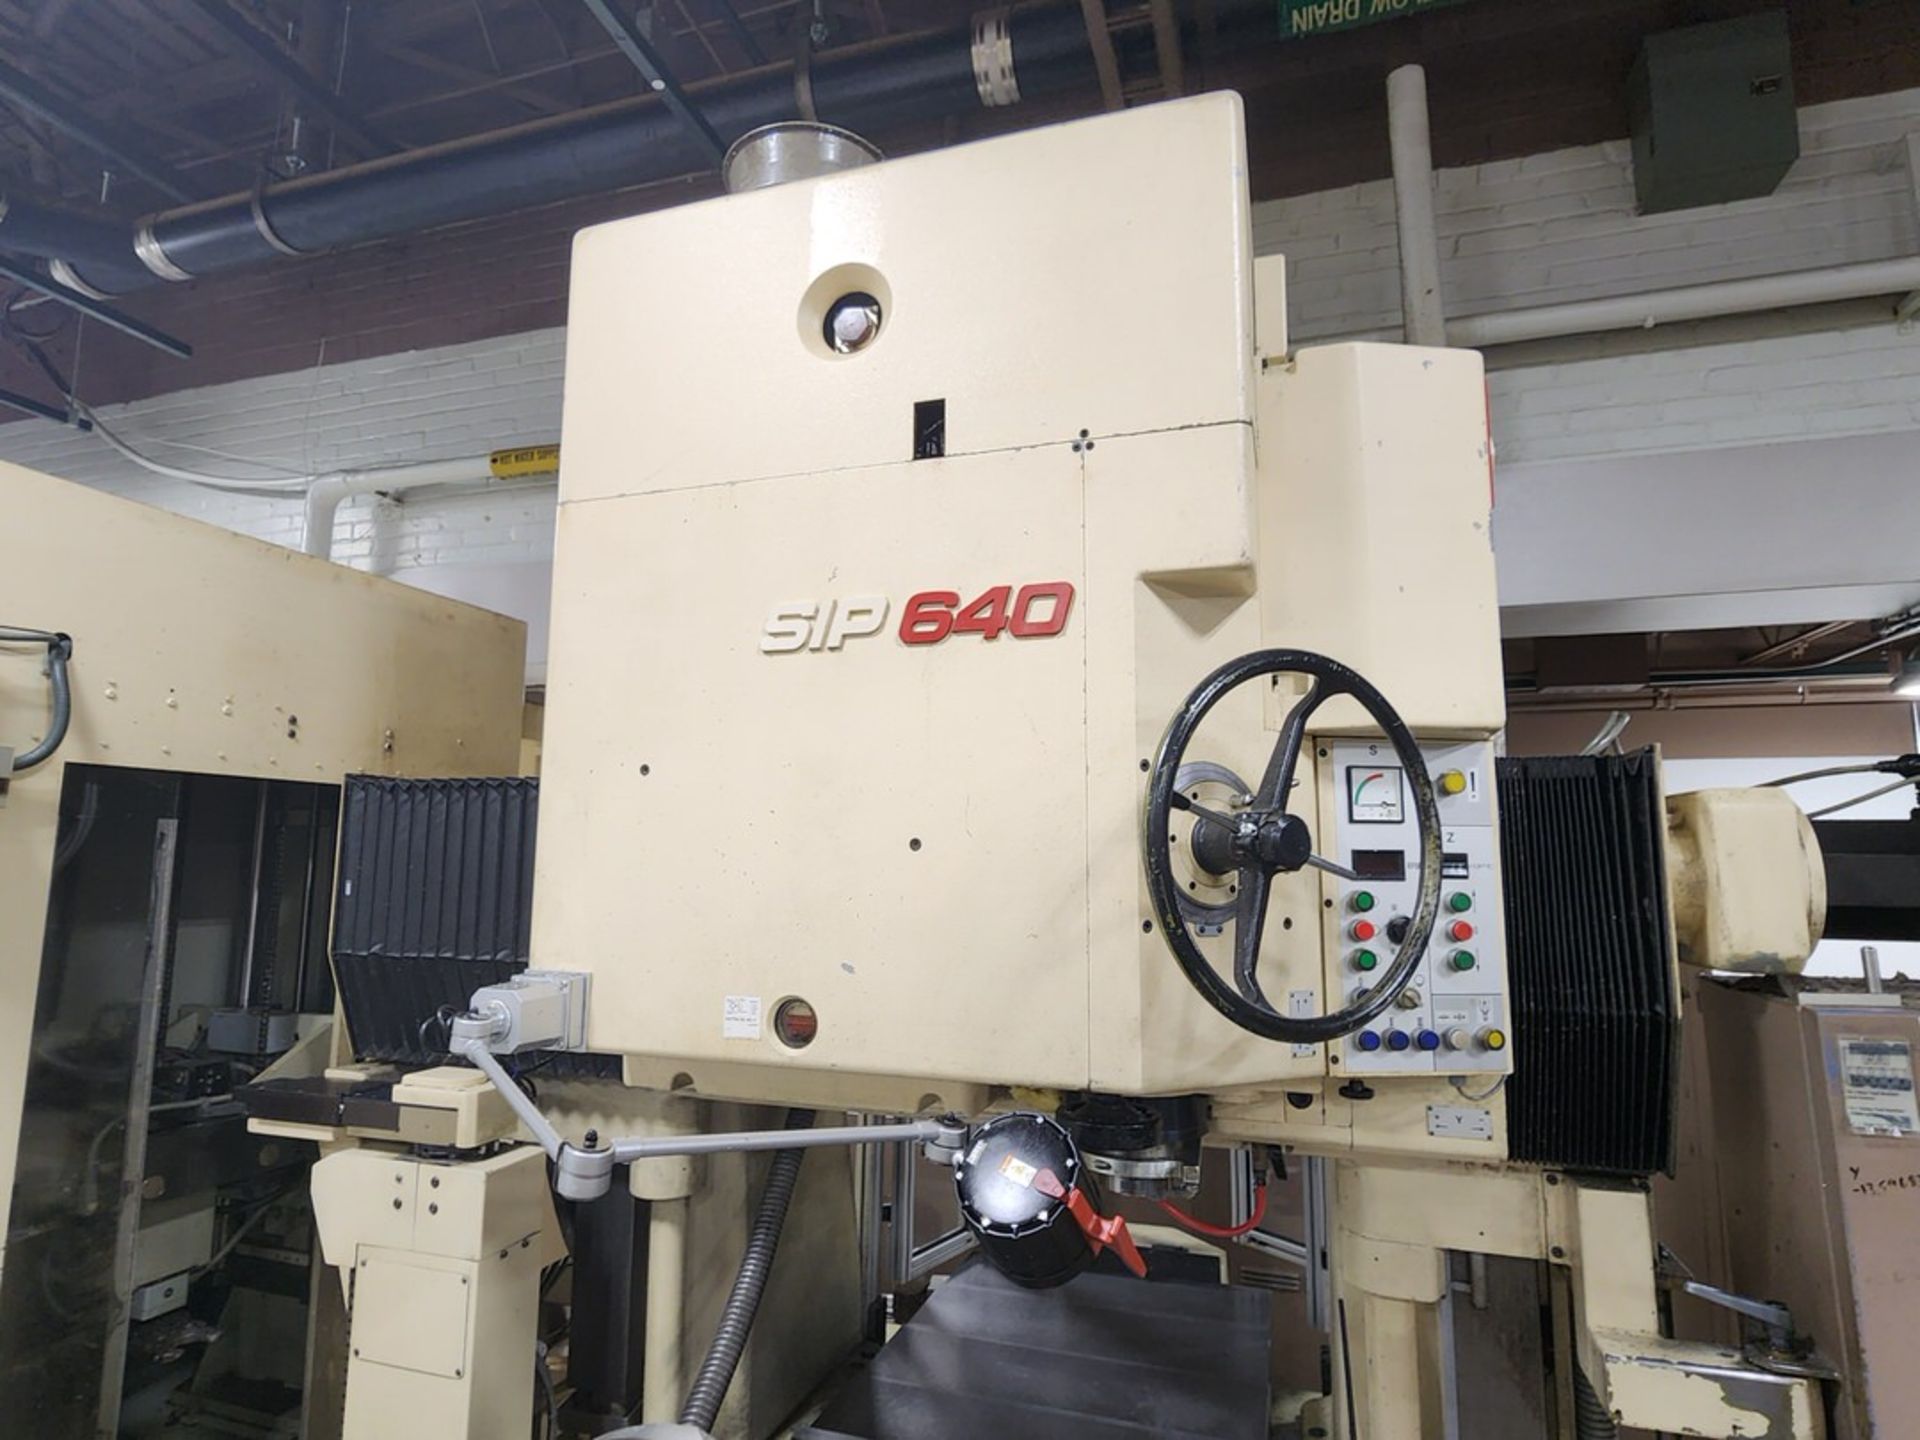 SIP SIP-640 Jig Boring Machine W/ Fanuc Series 16i-M Controller; Cutting Time: 15,304hrs - Image 5 of 36